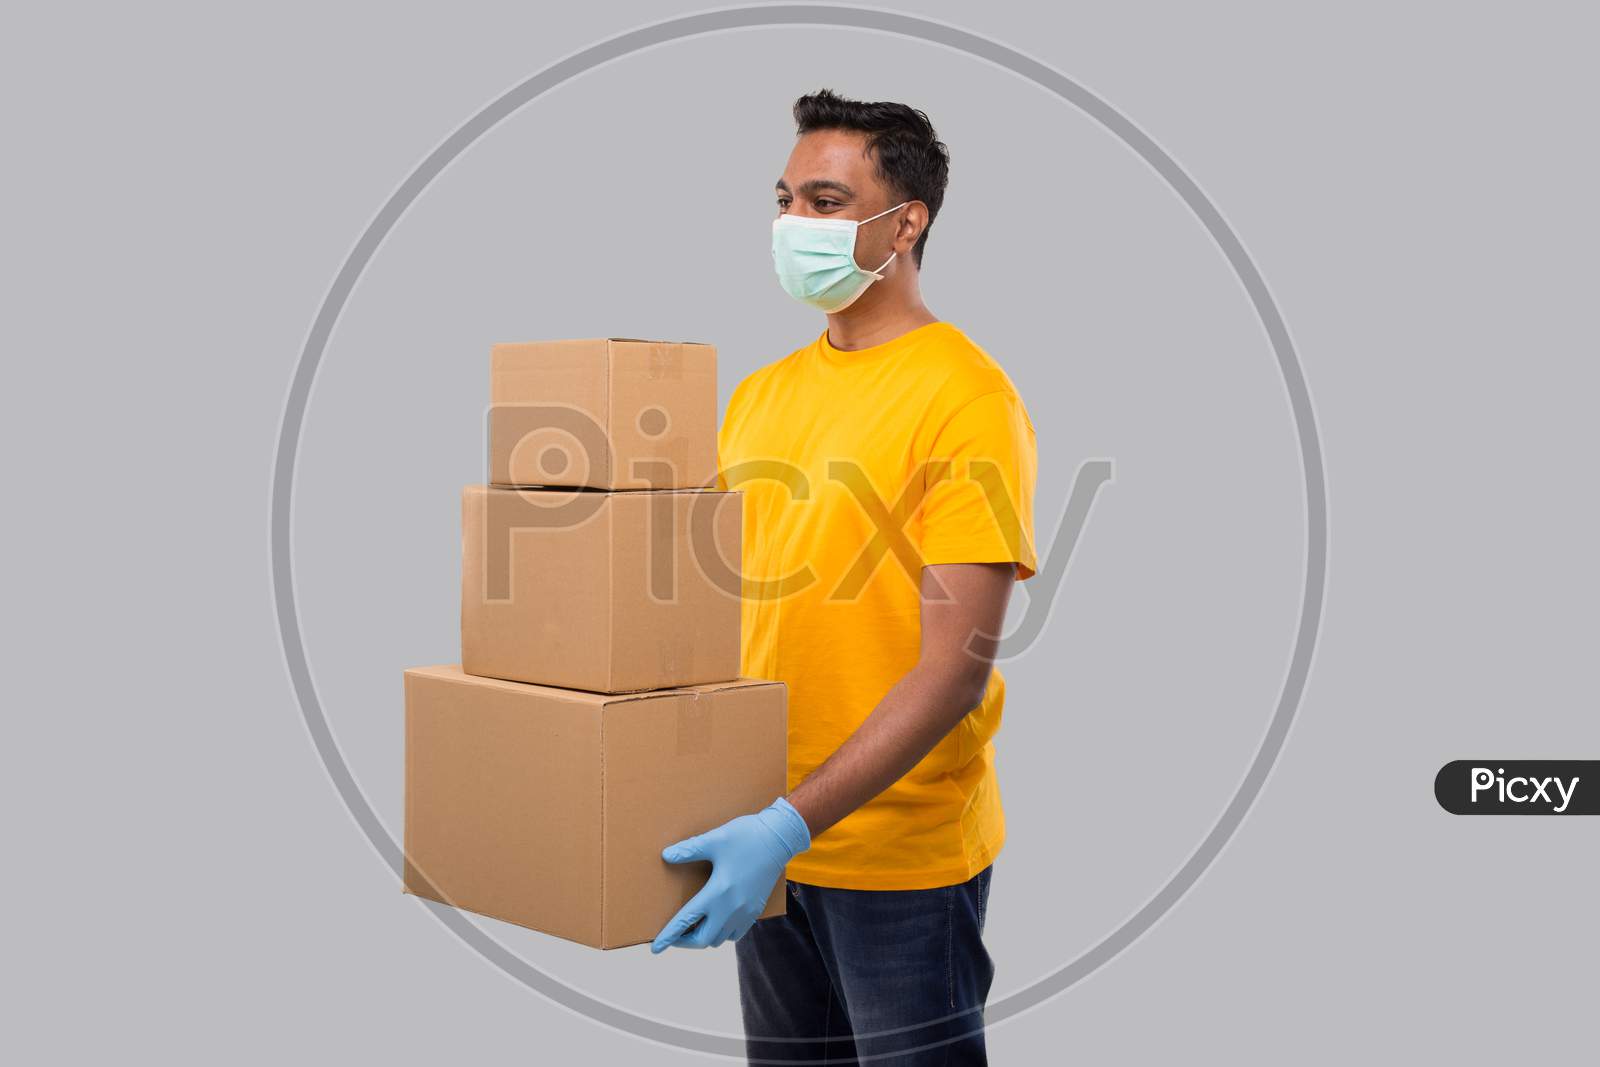 Delivery Man Holding A Lot Carton Boxes Wearing Medical Mask And Gloves Isolated. Indian Delivery Boy Overloaded With Boxes. Heavy Boxes